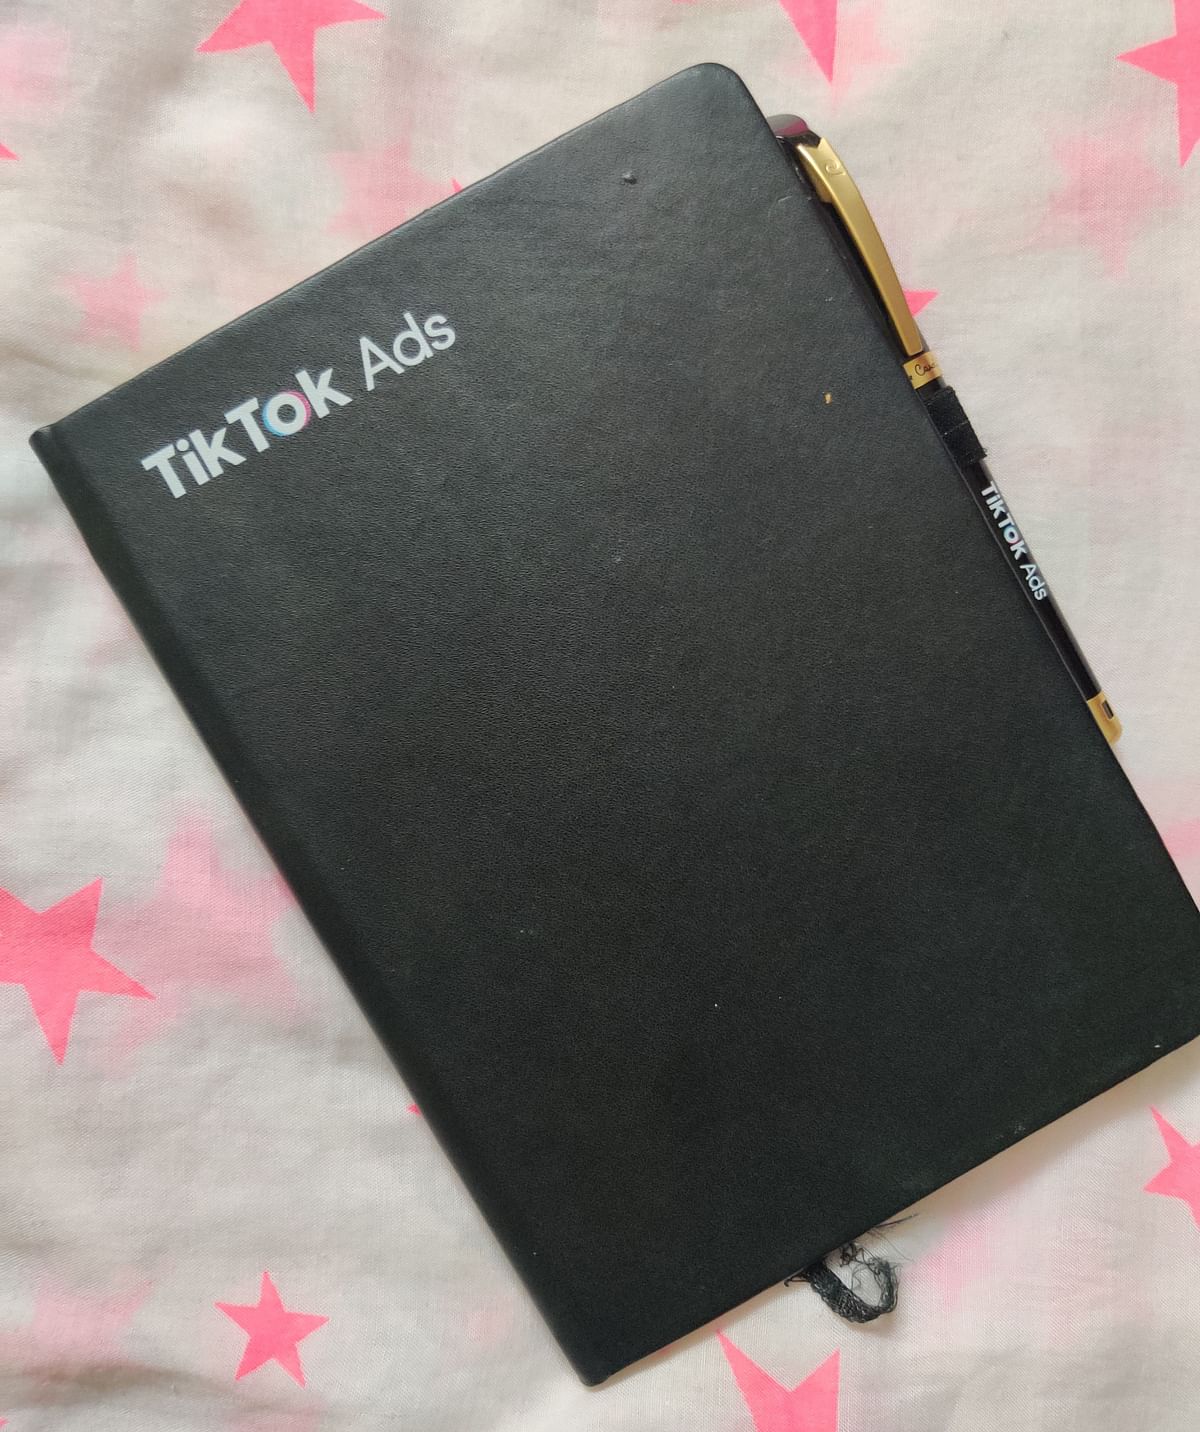 A diary and pen with TikTok's logo 